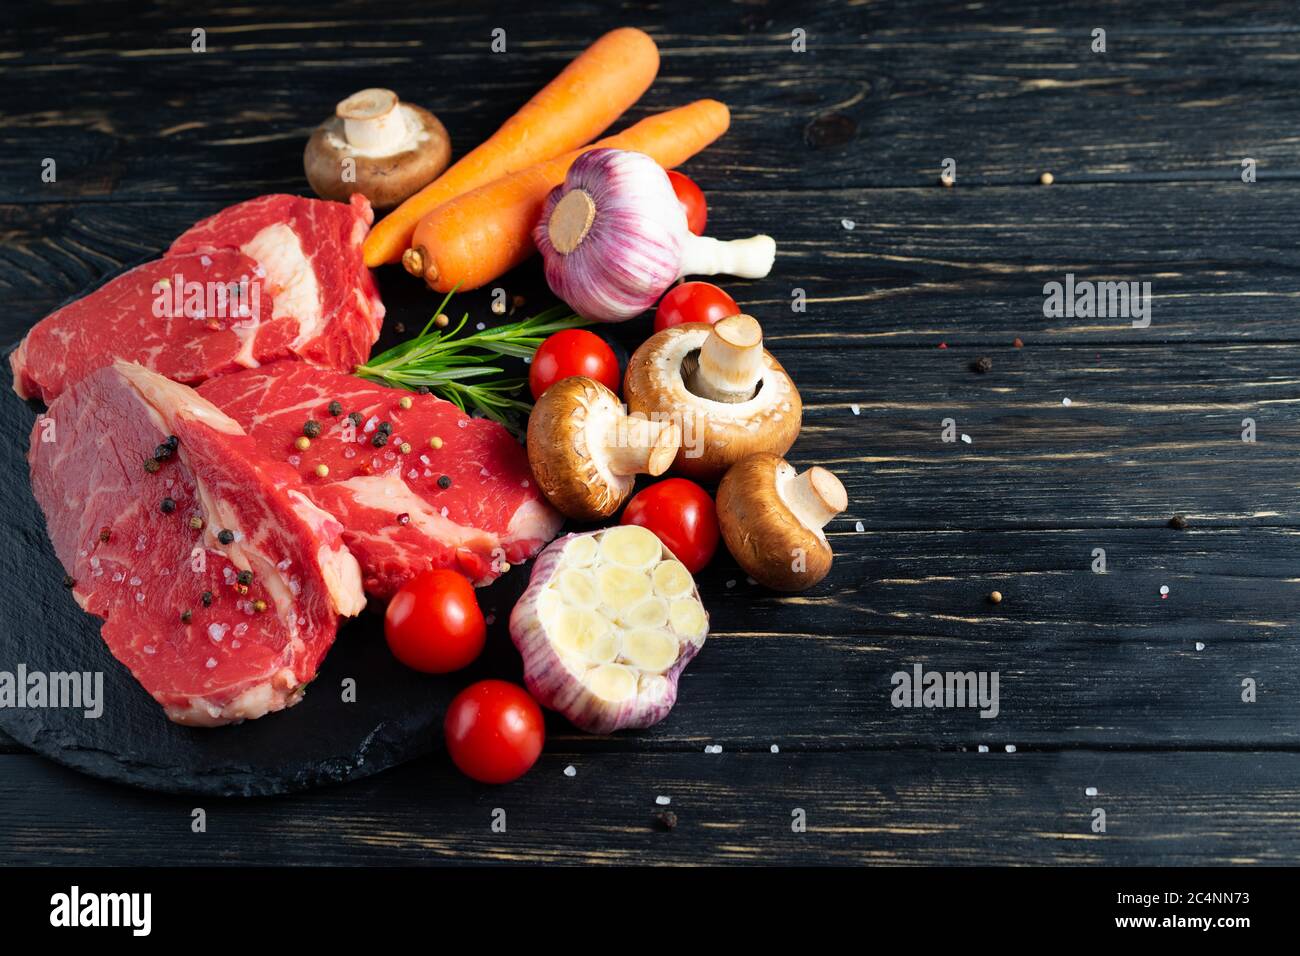 Three pieces of juicy raw beef with rosemary on a stone cutting board on a black wooden table background. Meat for barbecue or grill with vegetables pepper and salt seasoning Stock Photo